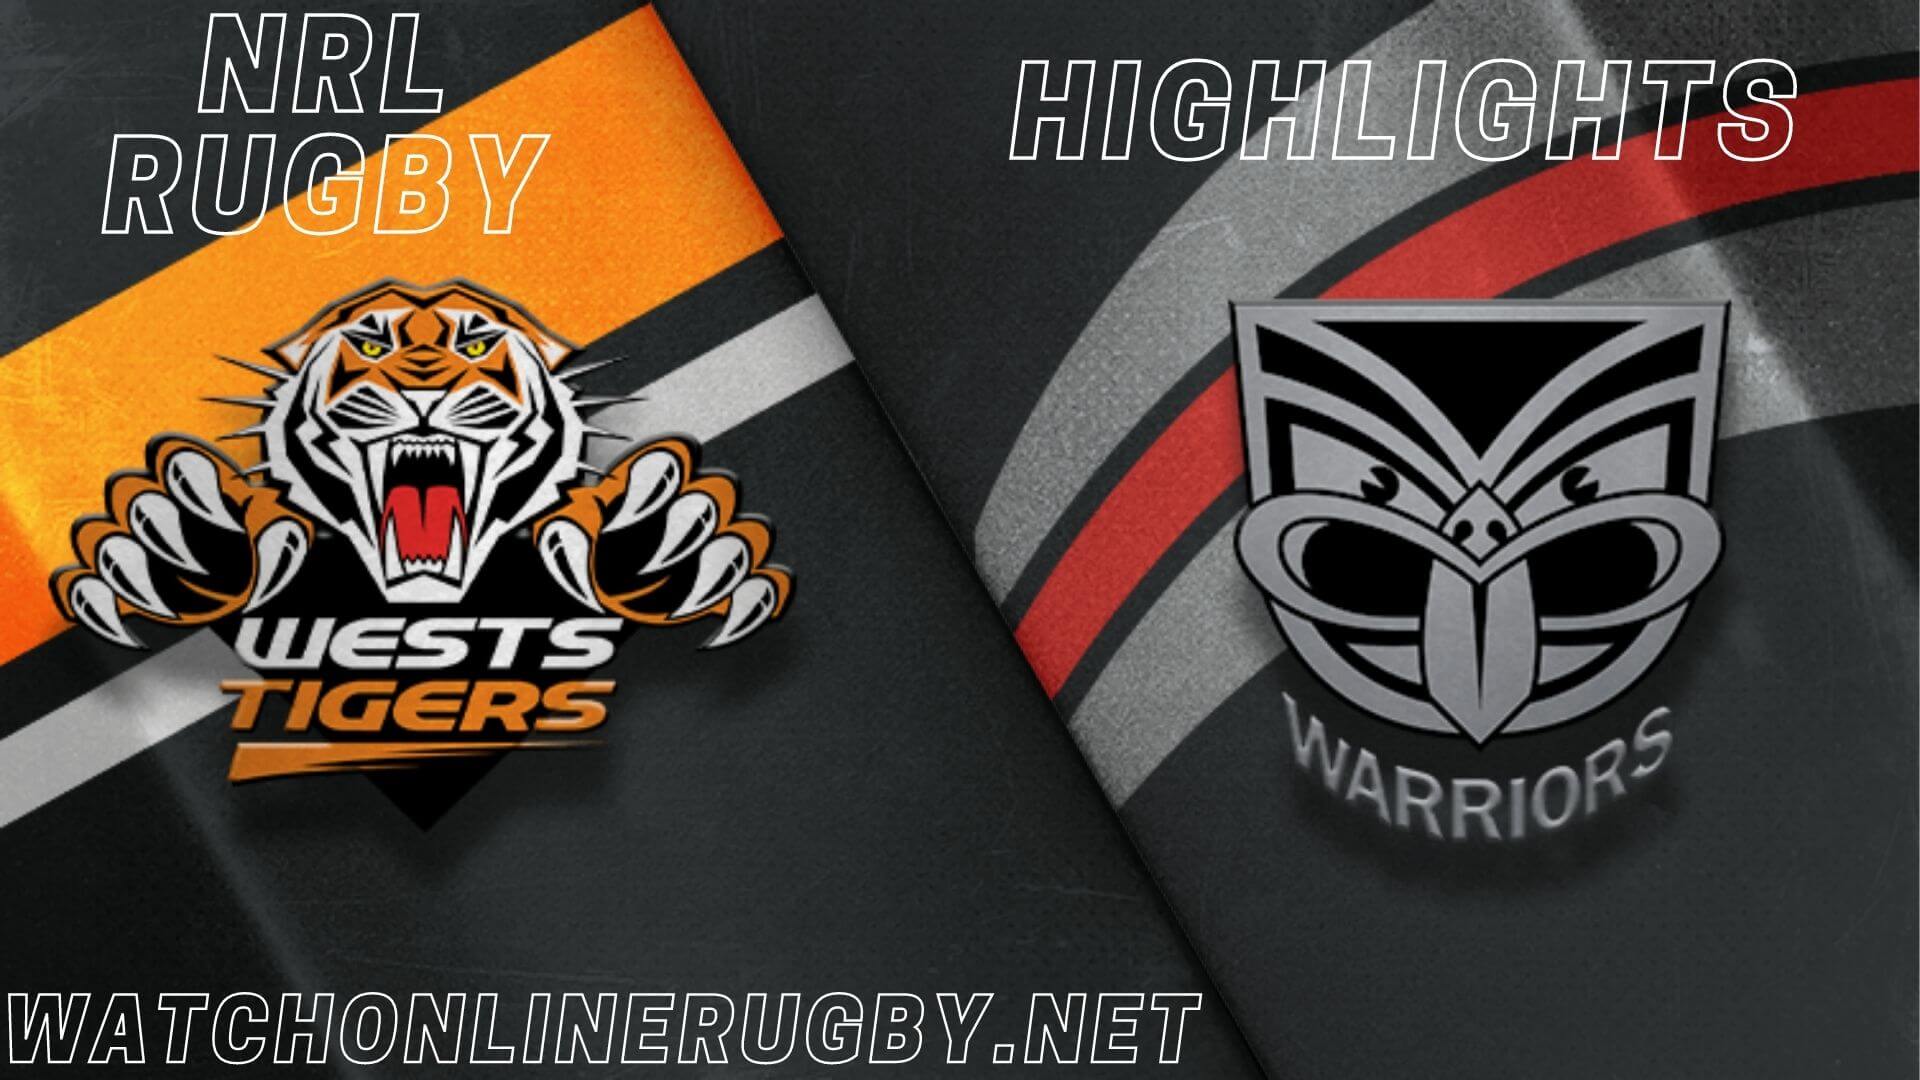 Warriors Vs Wests Tigers Highlights RD 16 NRL Rugby